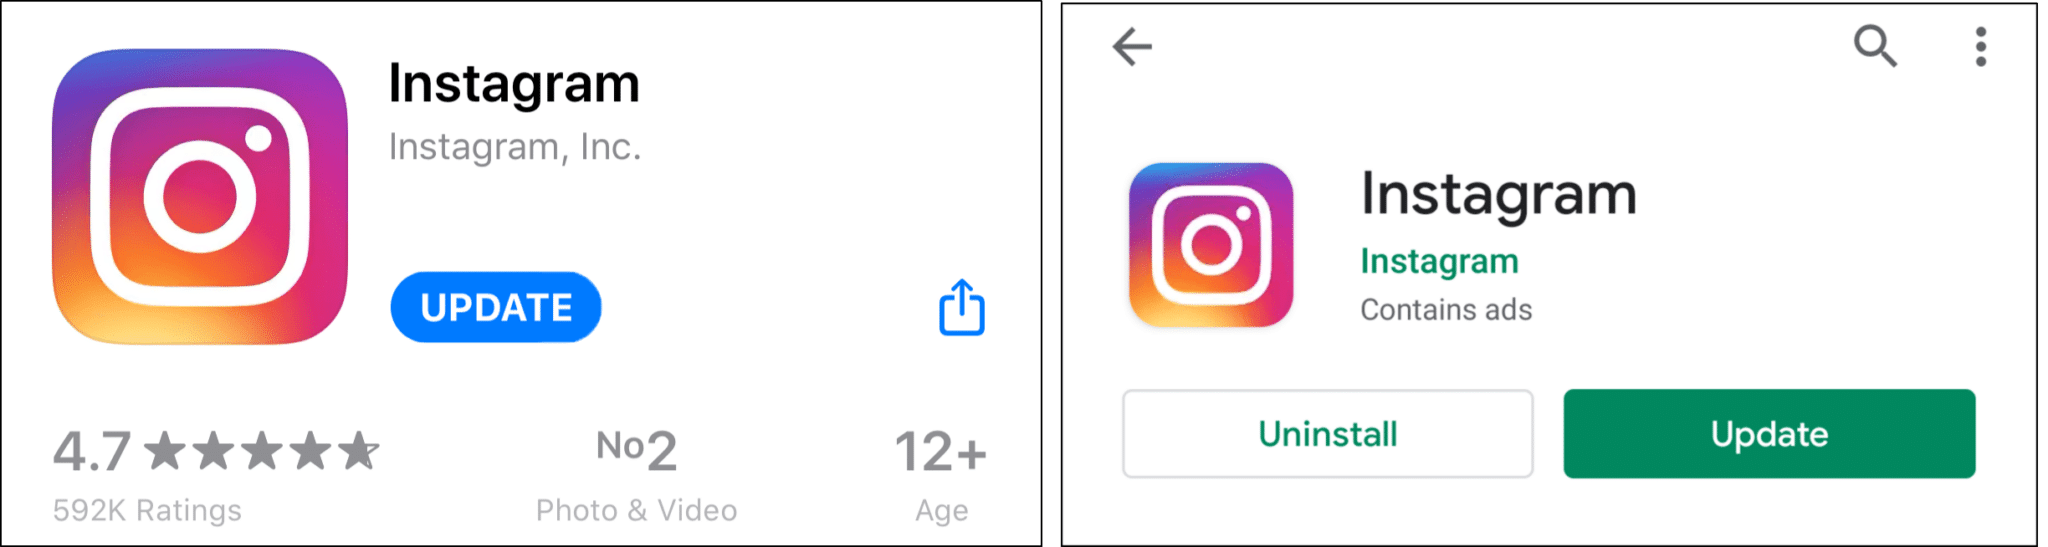 Update Instagram app to fix search not working